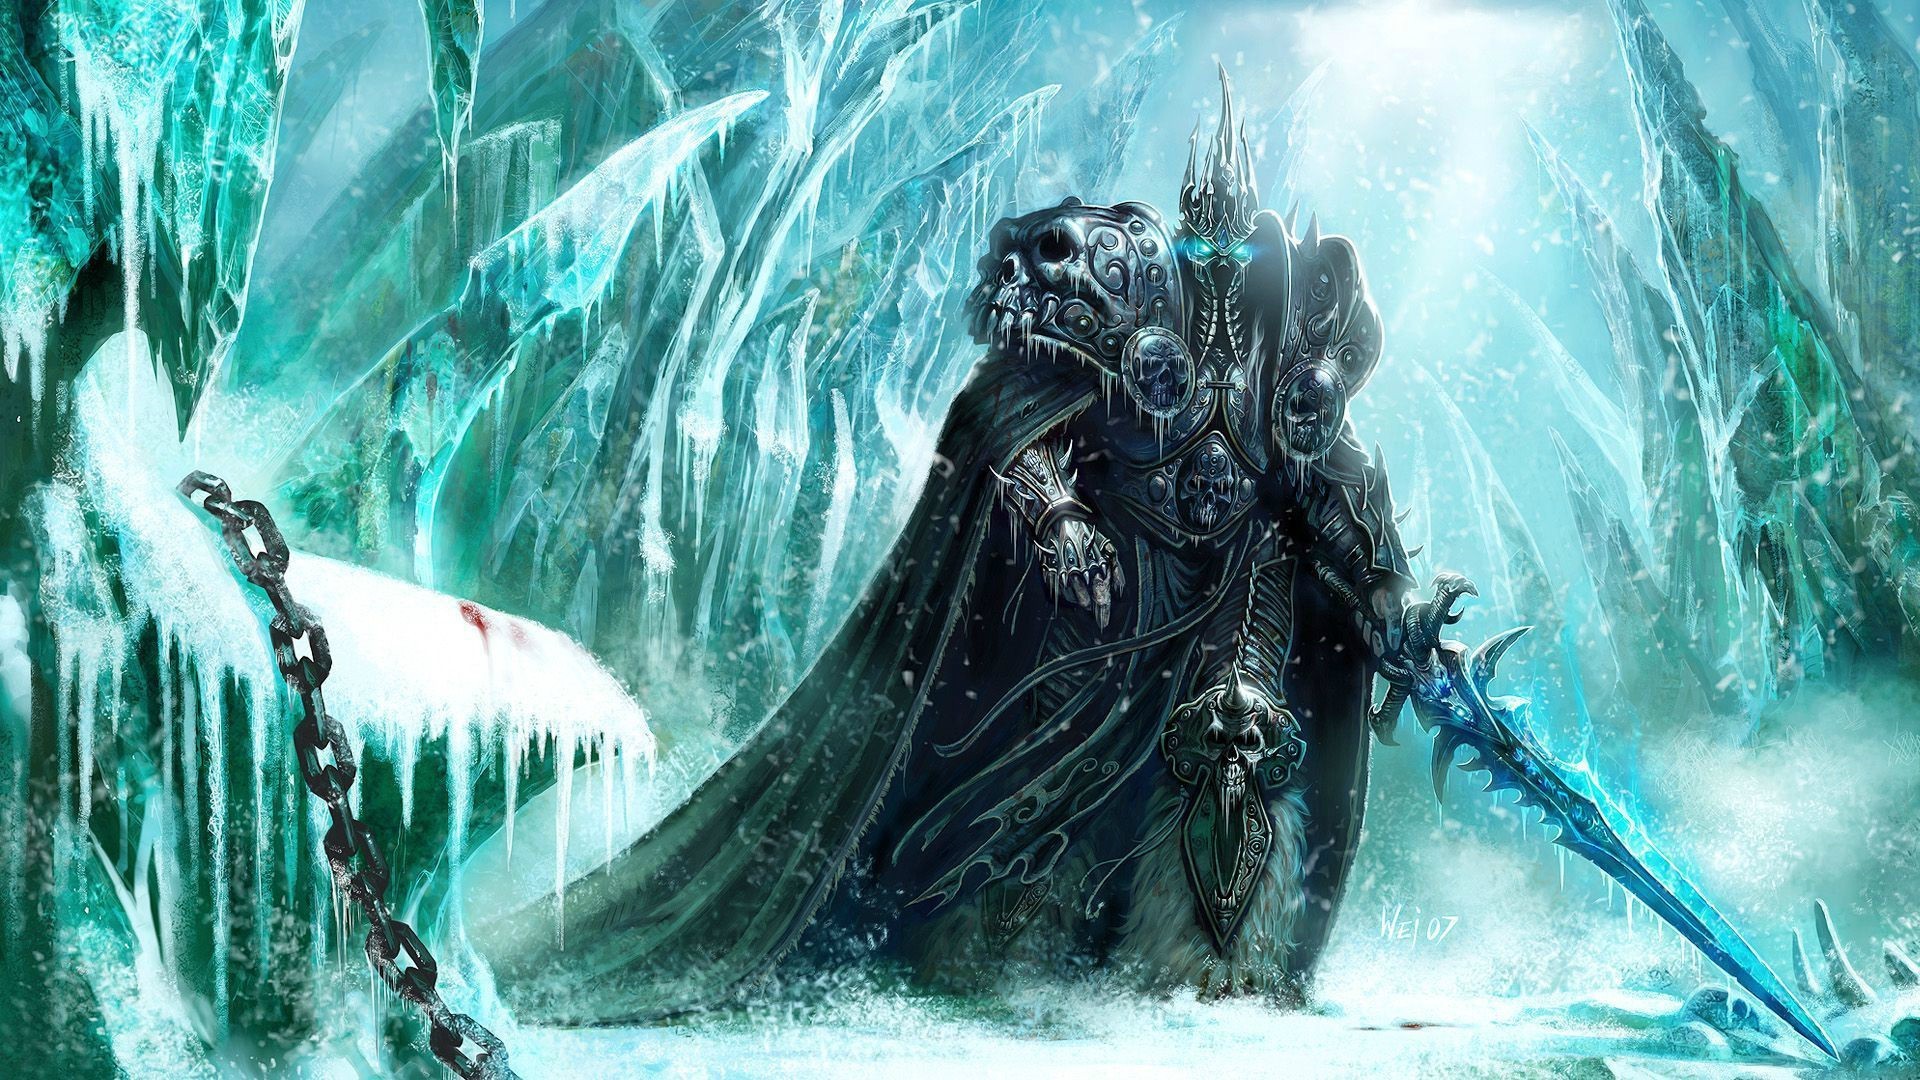 General 1920x1080 World of Warcraft World of Warcraft: Wrath of the Lich King video games cyan ice video game art PC gaming